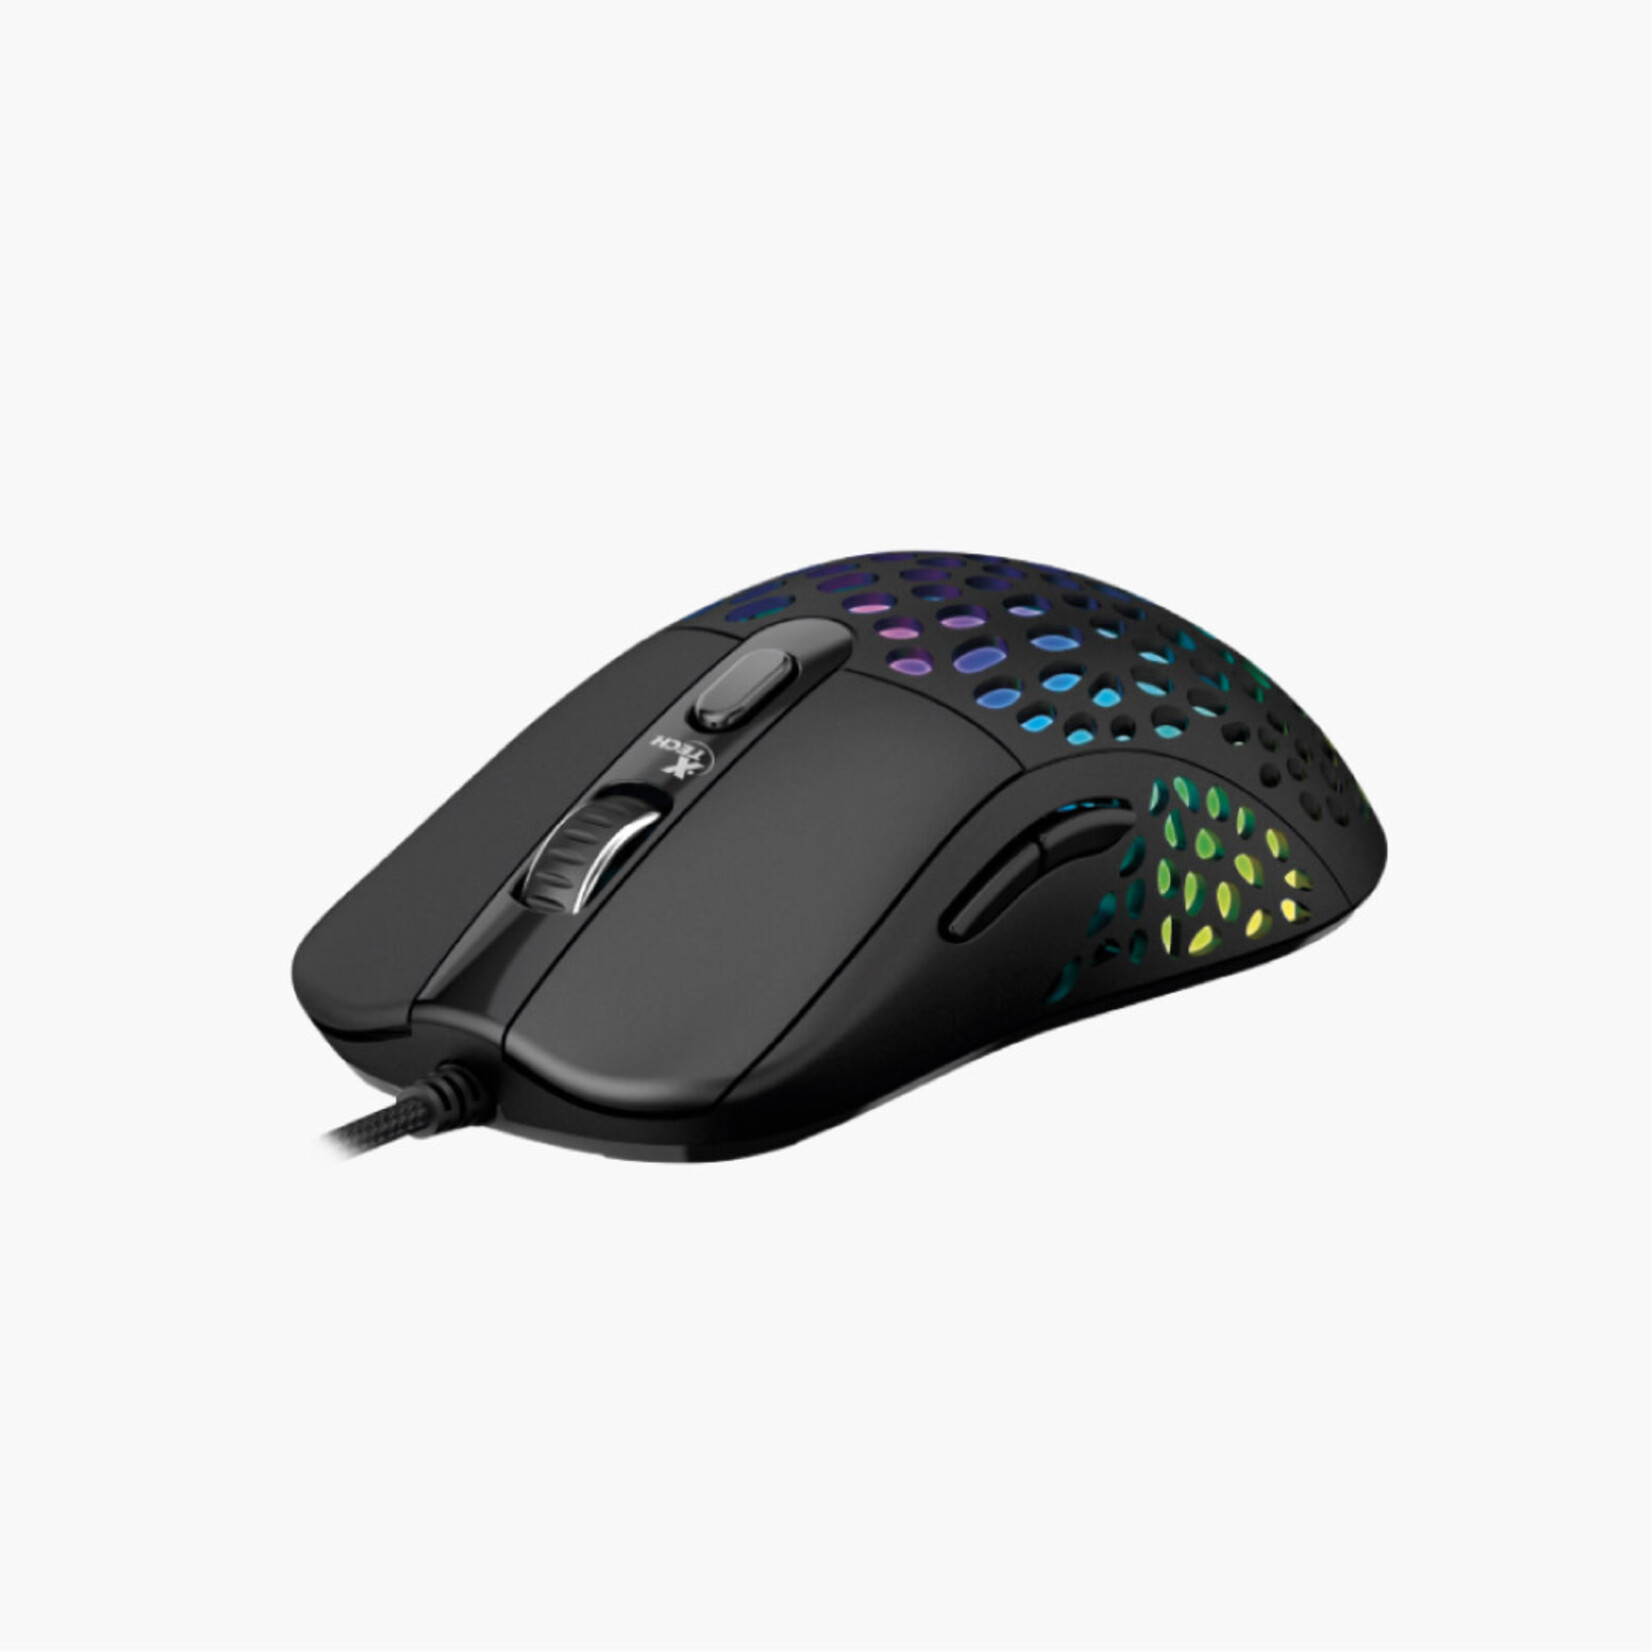 XTech **XTech Swarm Honeycomb Wired Gaming Mouse 6 Button RGB